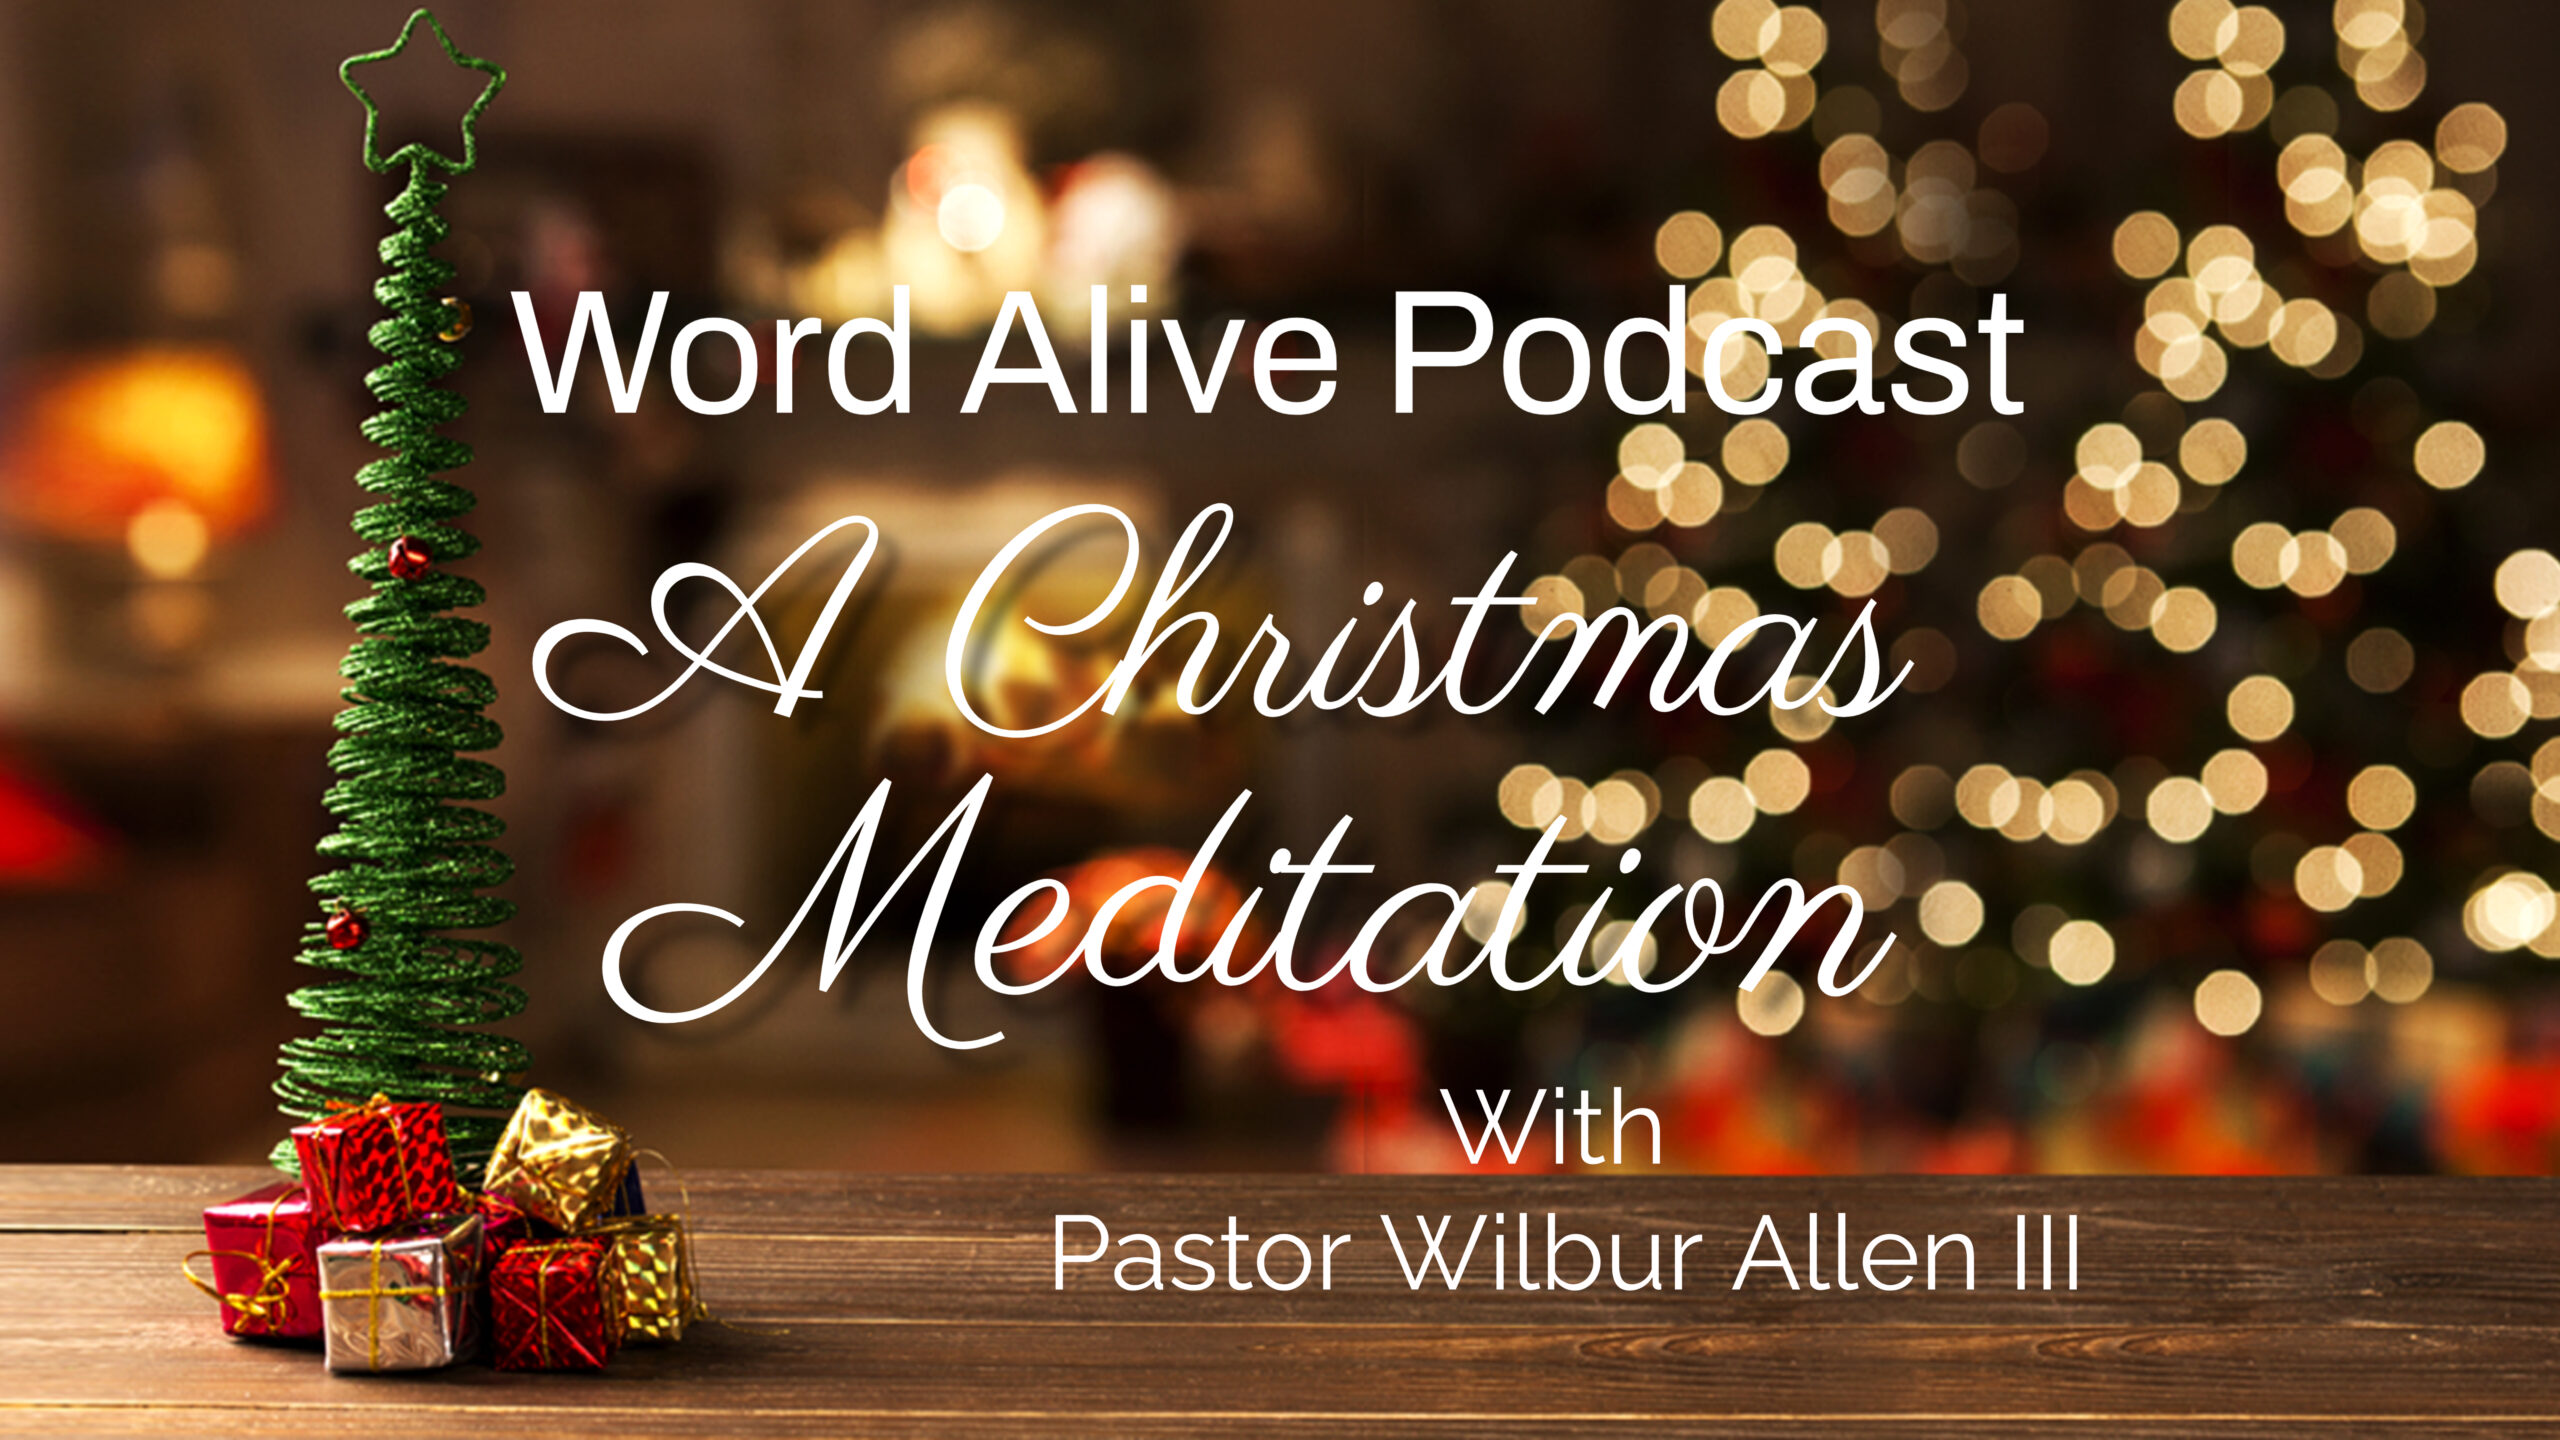 Word Alive Podcast - A Special Christmas Meditation